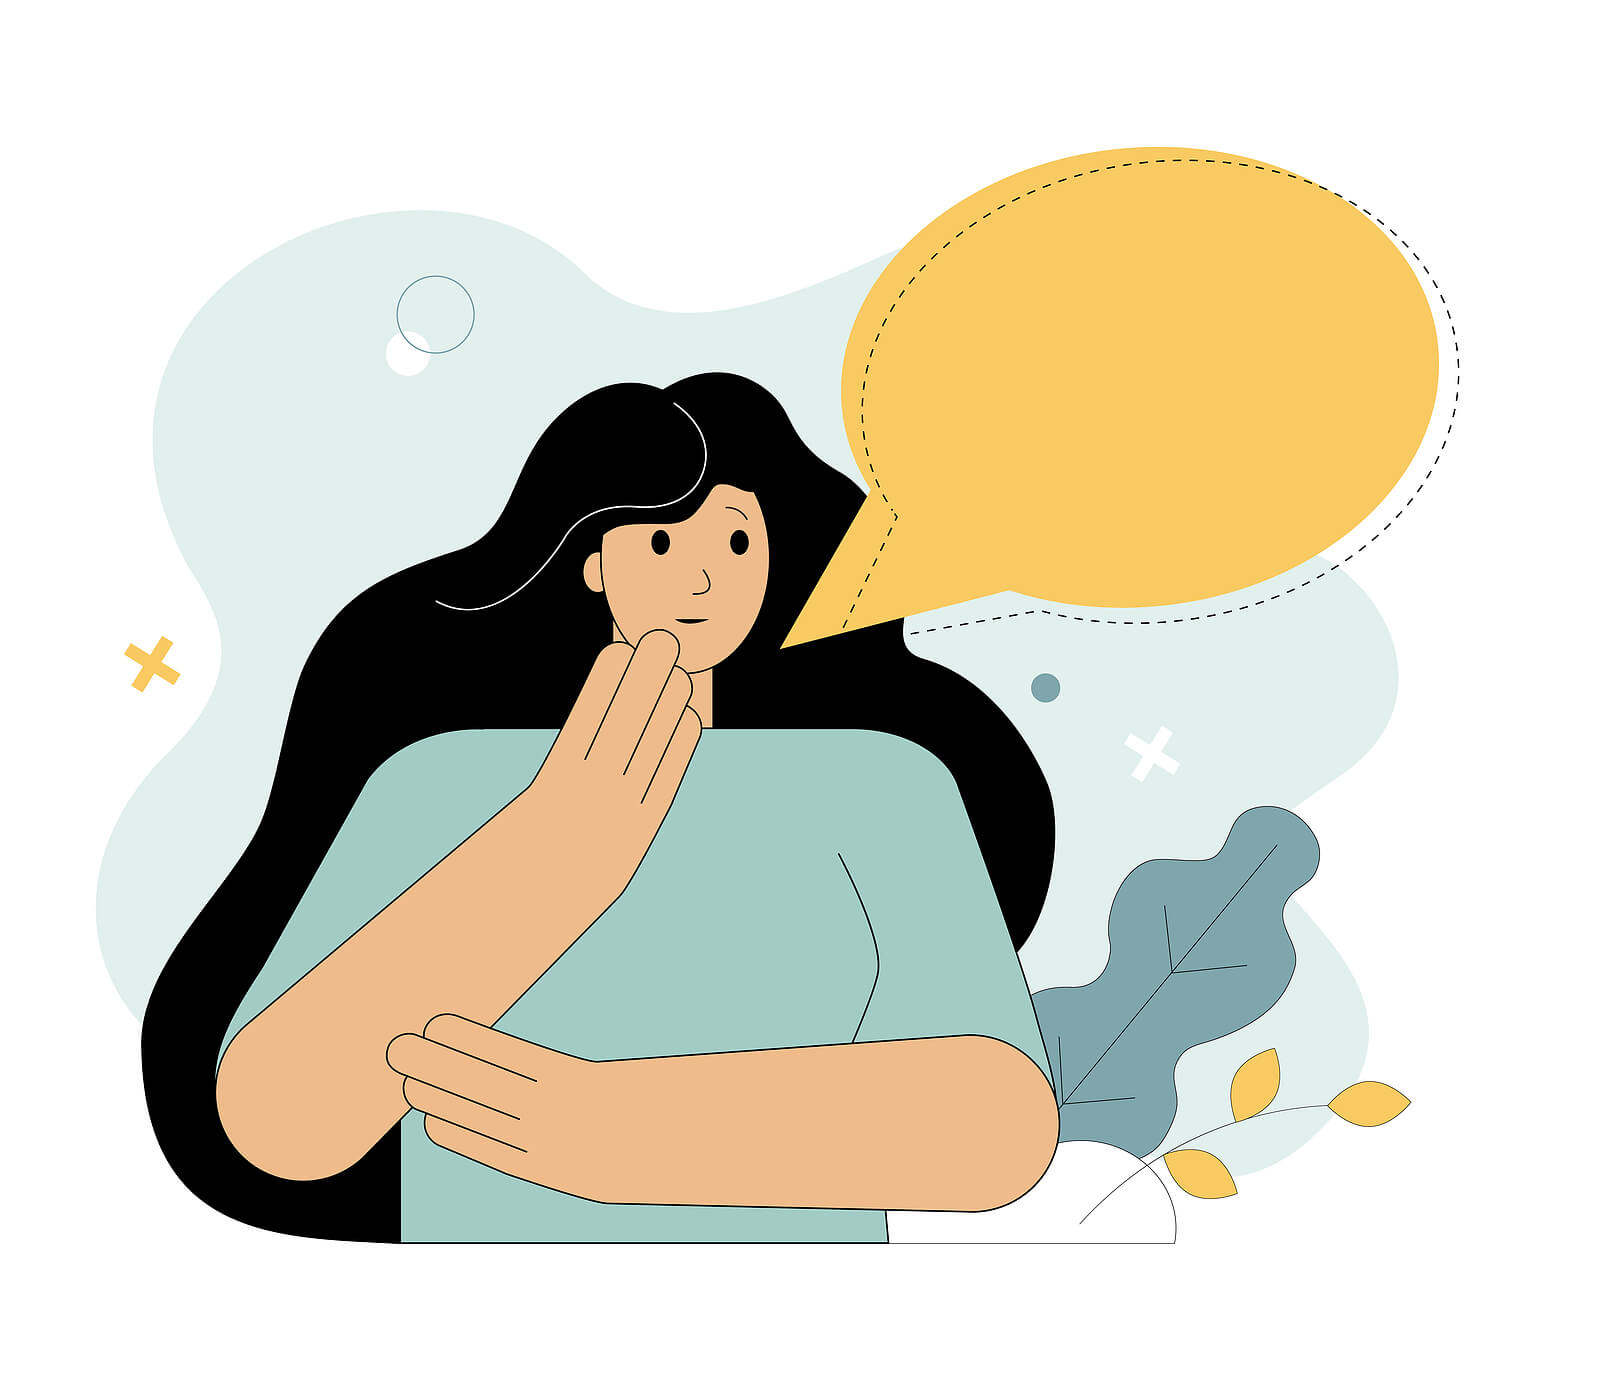 Cartoon woman pondering. If you are thinking about investing in SEO, then you are in the right place. We have training and Done for you SEO services. If you are seeking SEO for mental health professionals, our team can help. 